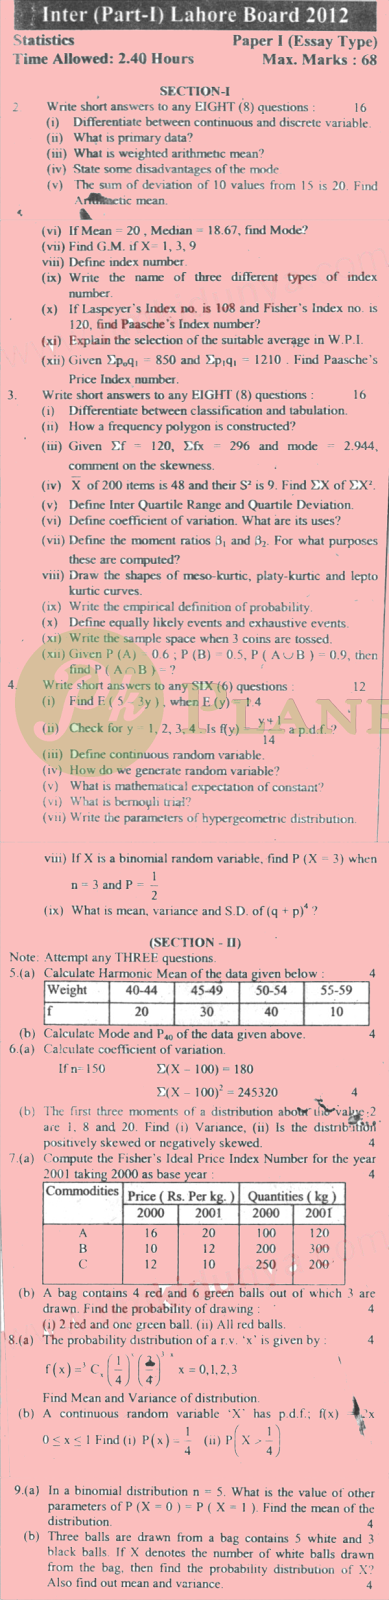 Past Papers of Statistics Inter part 1 Lahore Board 2012